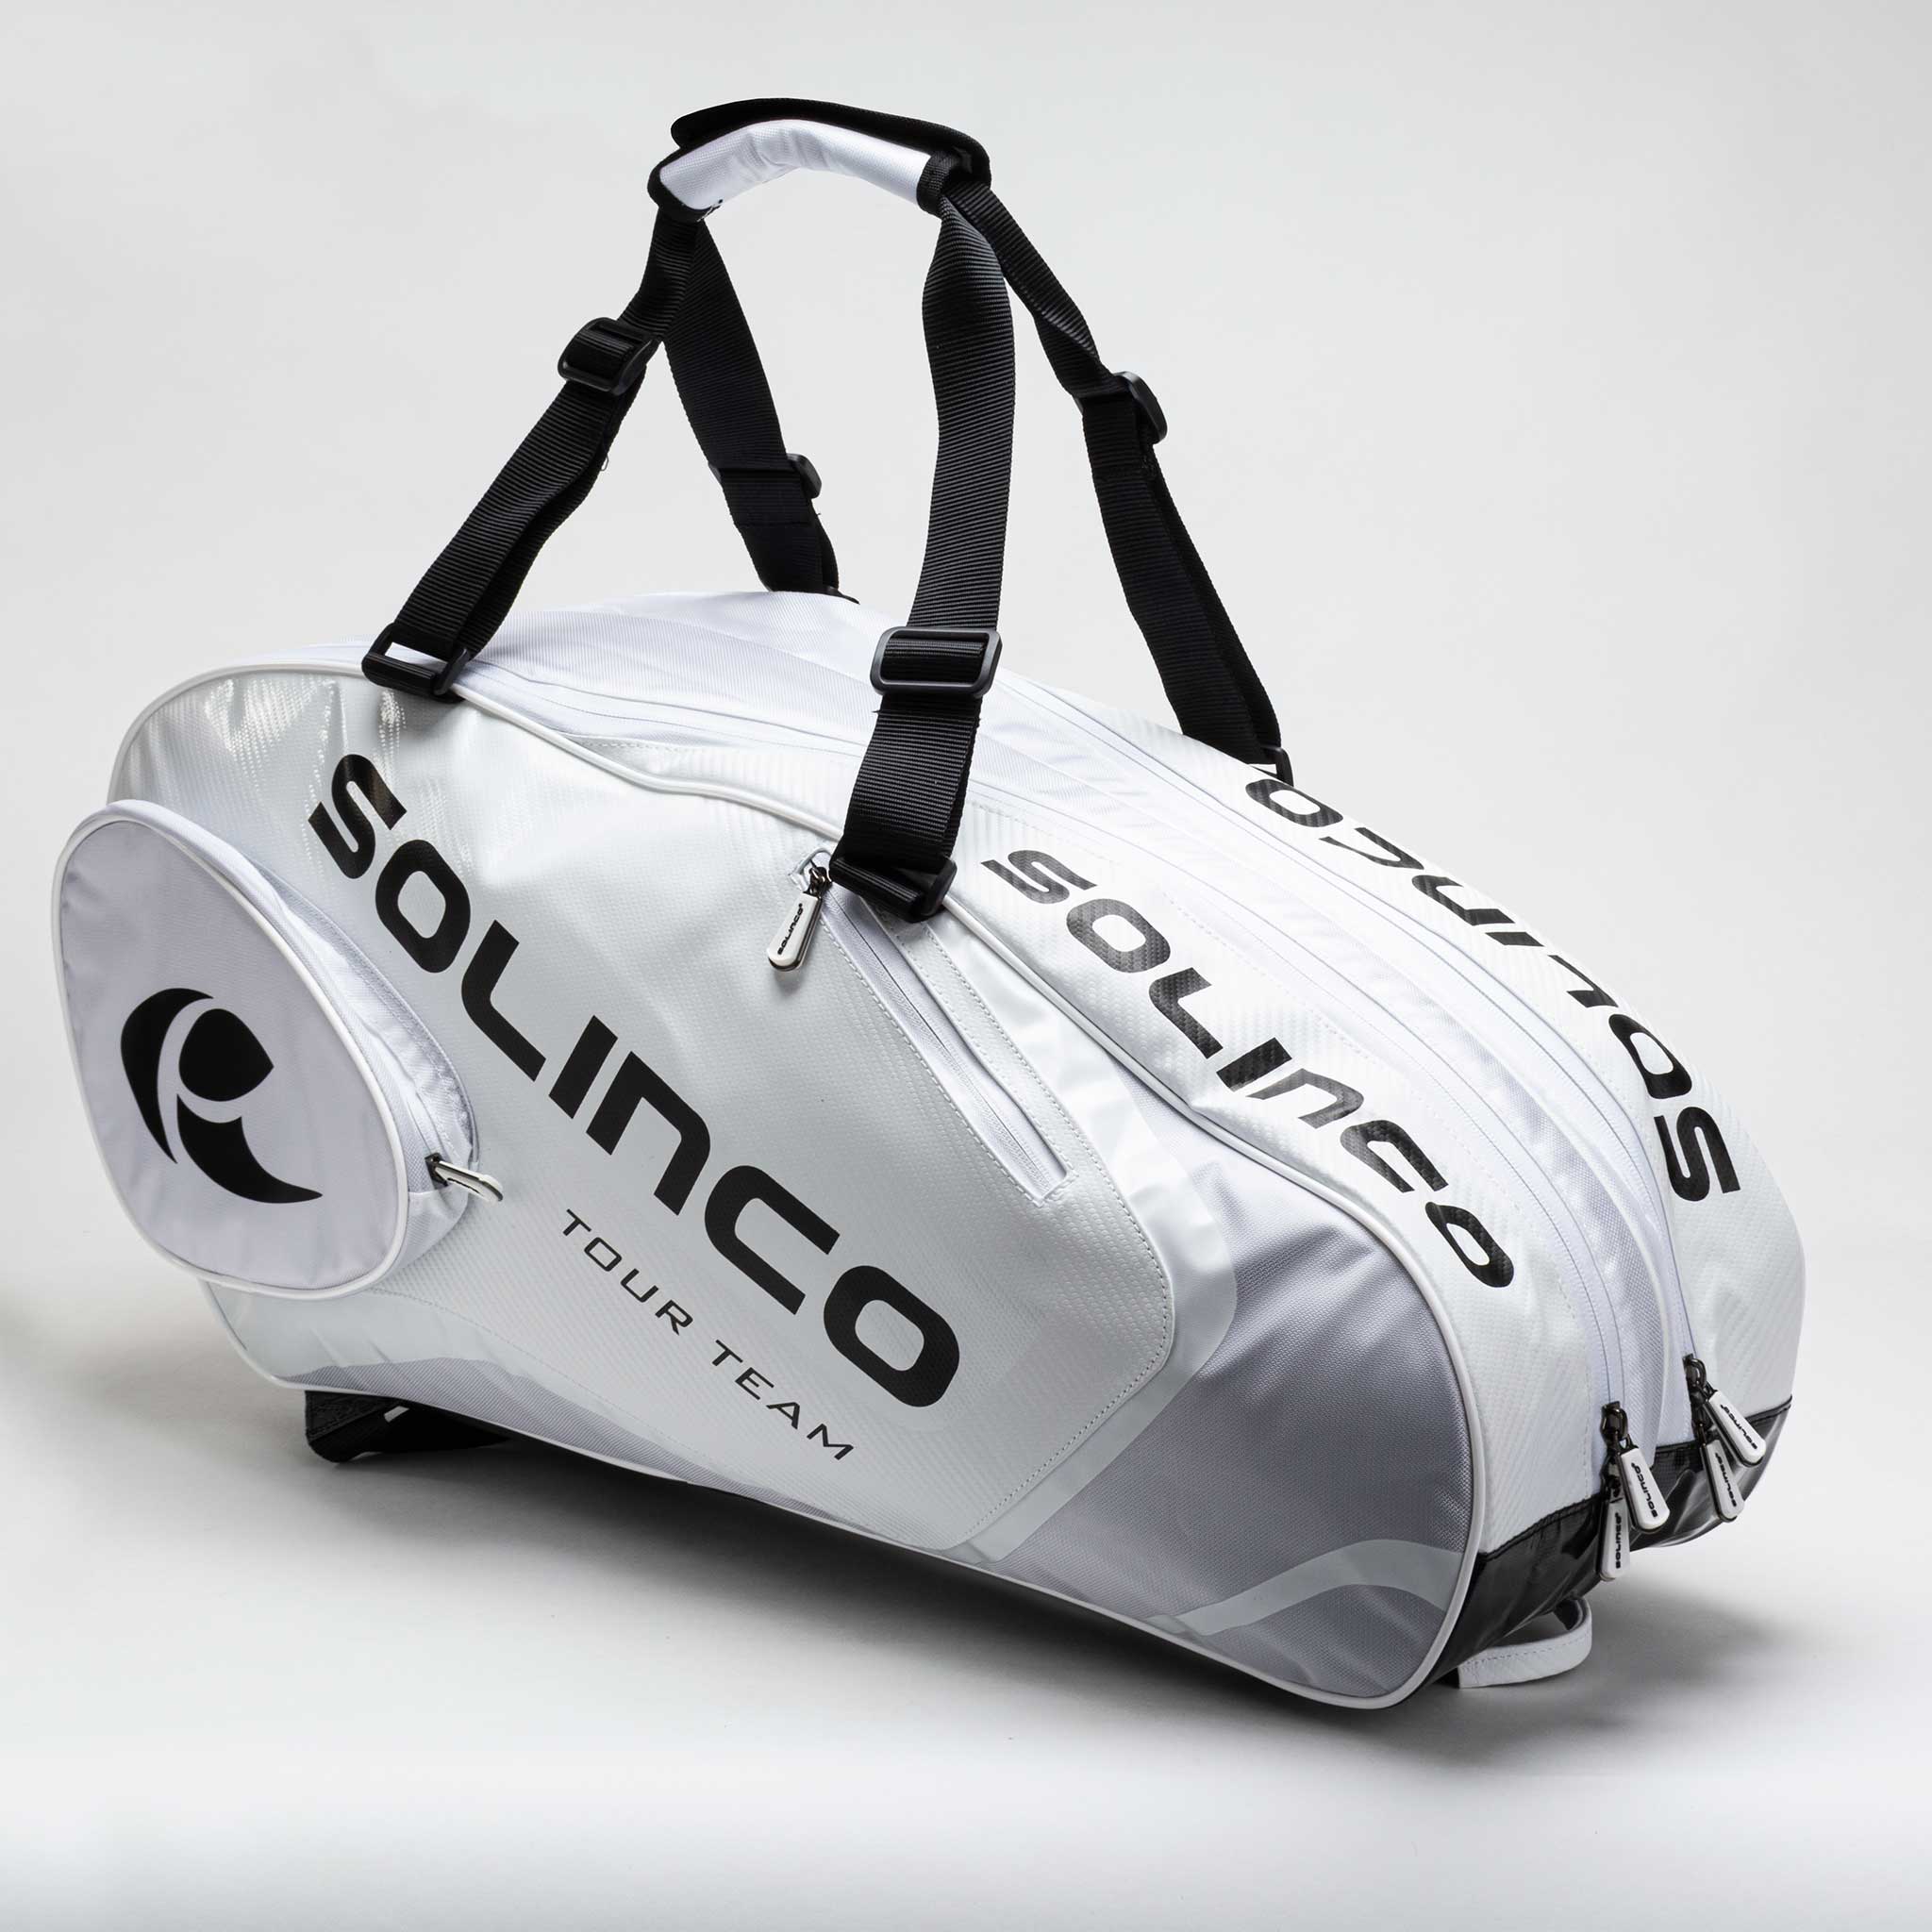 Solinco Whiteout 6 Pack Bag